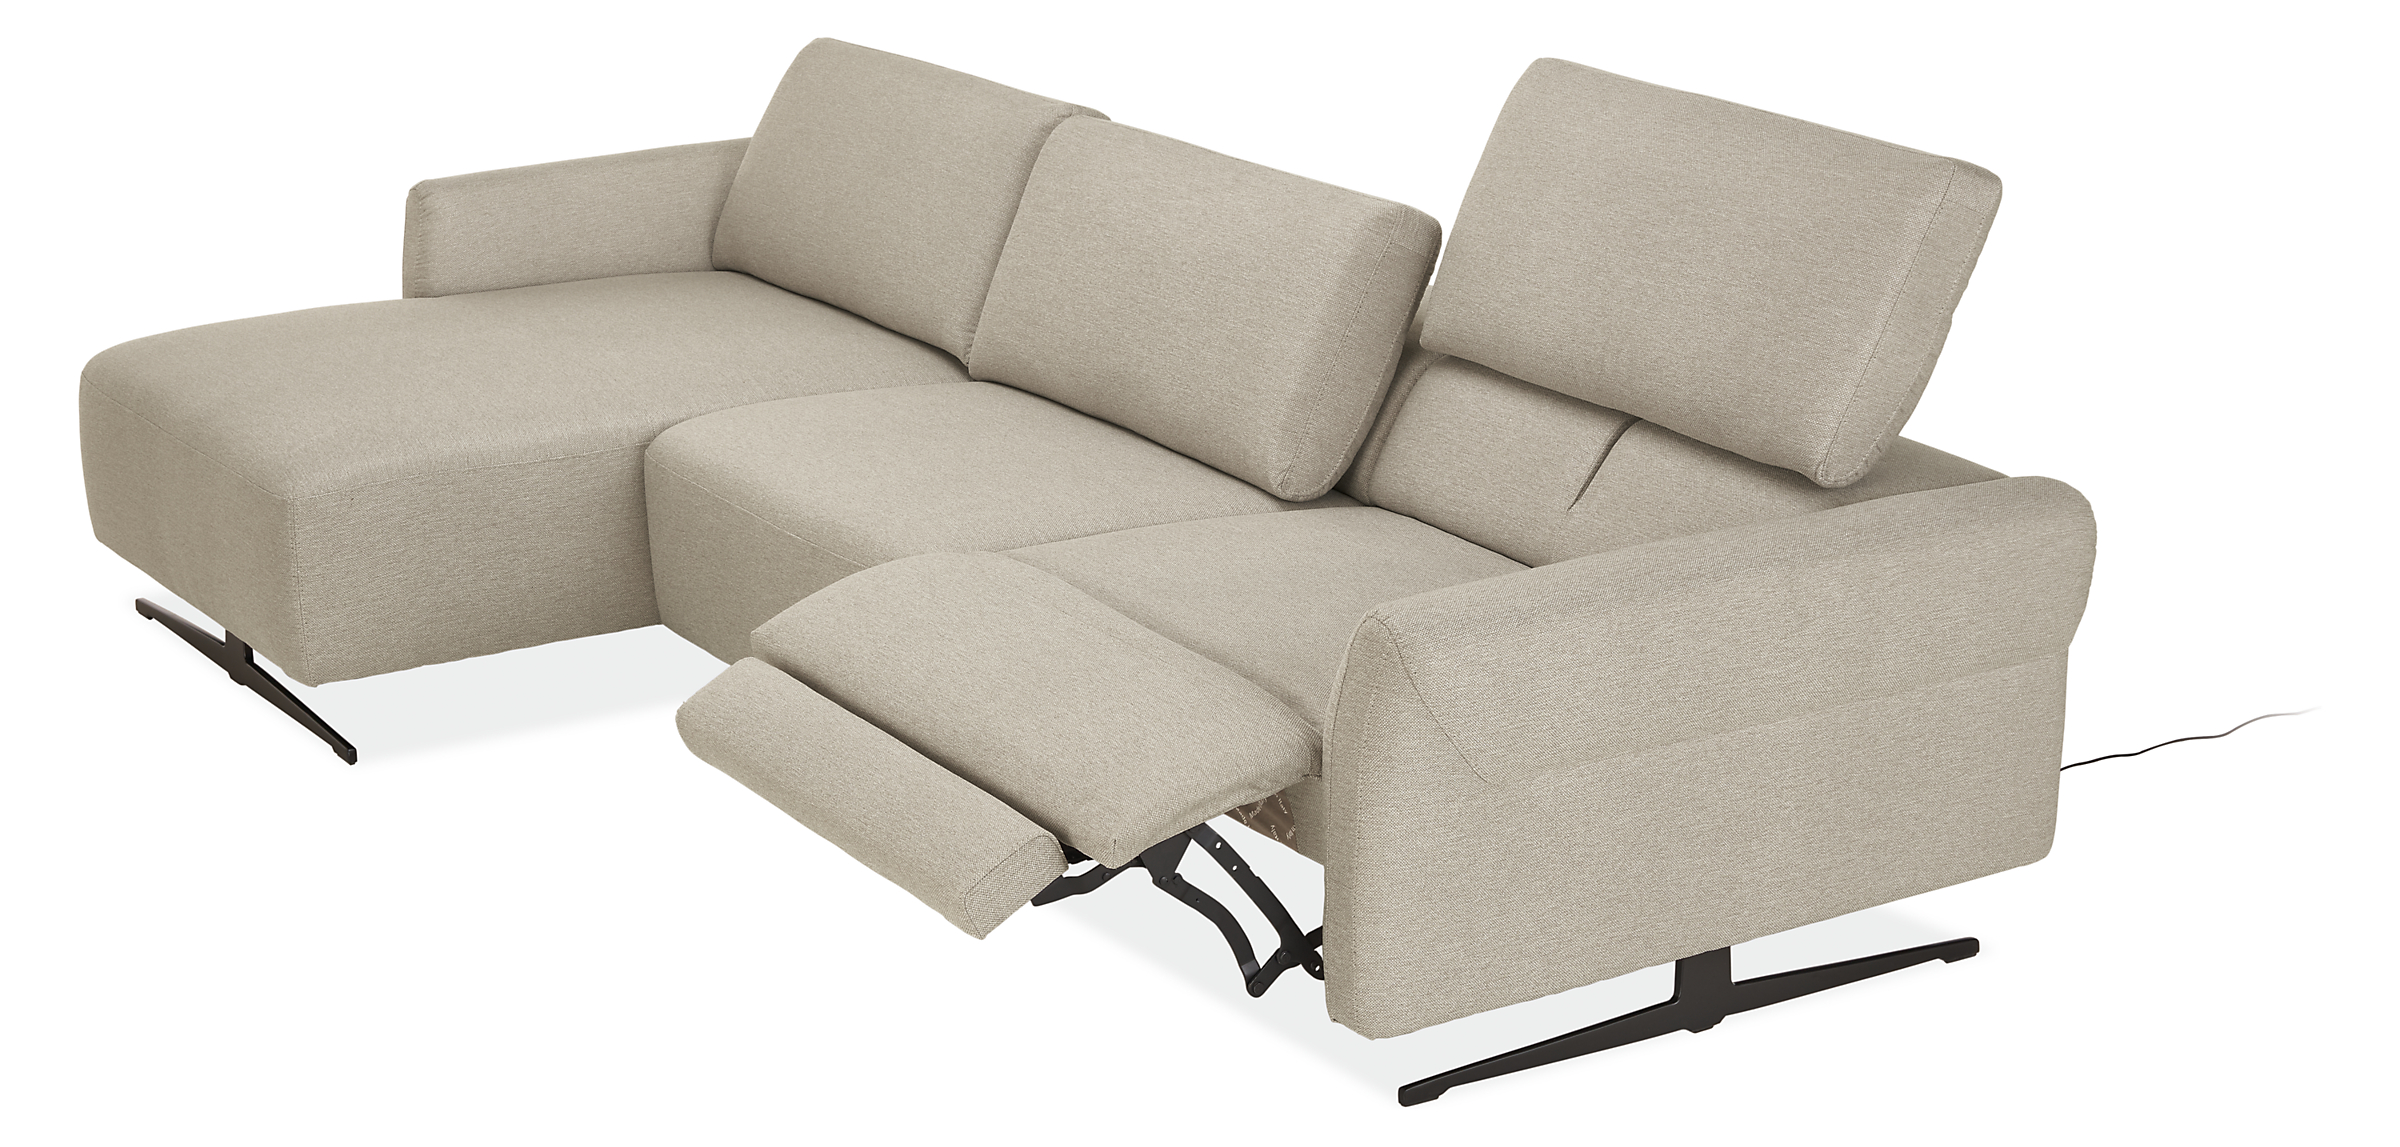 Detail of Vesna 3 piece sofa chaise with power in fabric shown in recline position with headrest in raised position.